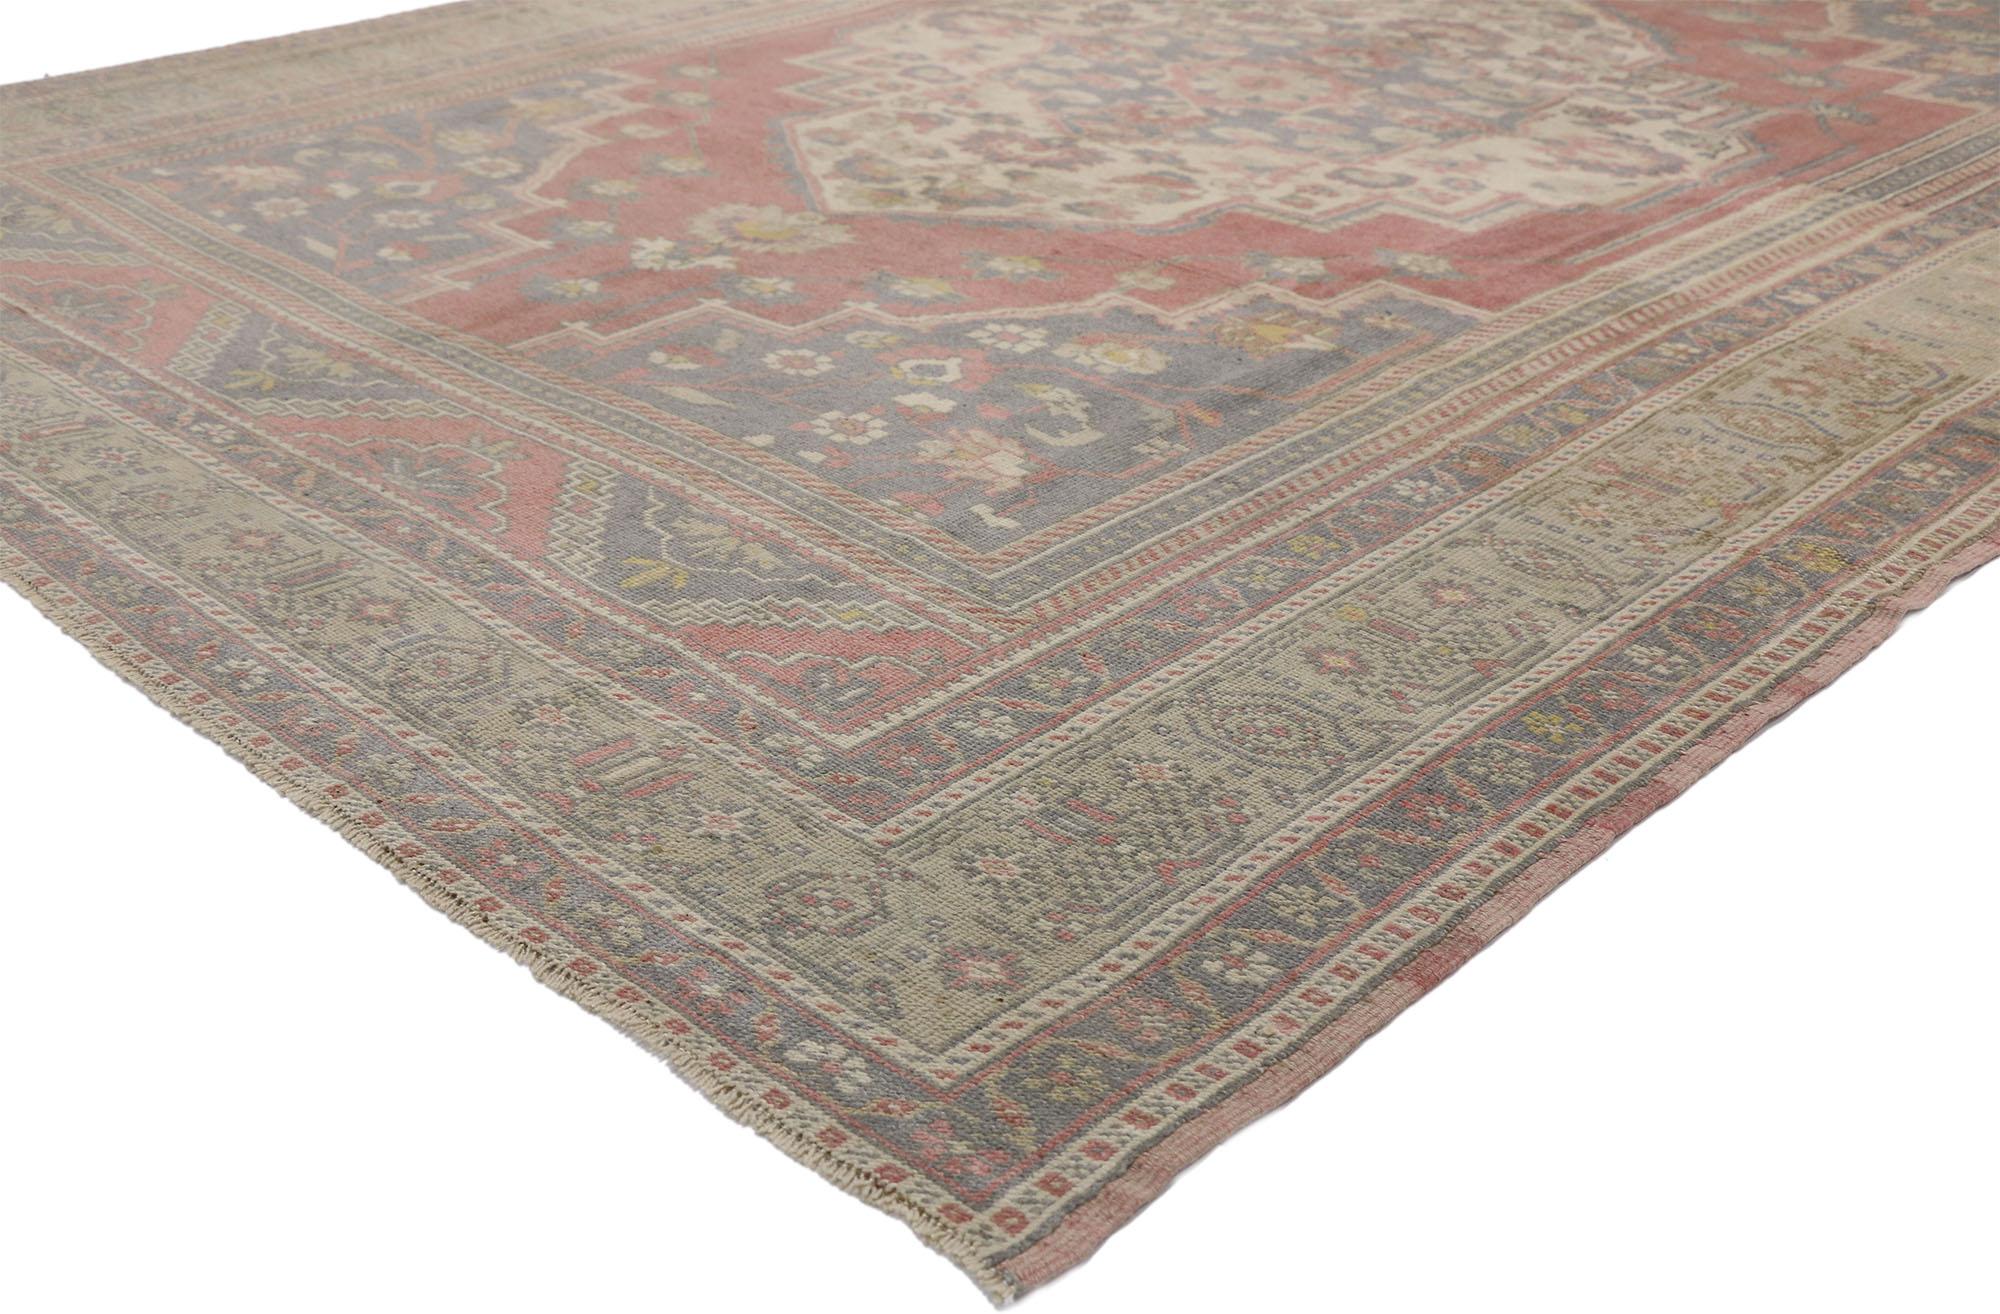 52436 Vintage Turkish Oushak Rug with Artisan and American Colonial Style. This hand knotted wool vintage Turkish Oushak rug showcases a traditional floral medallion on a faded field framed by pale lavender spandrels and ziggurat end-pieces. The